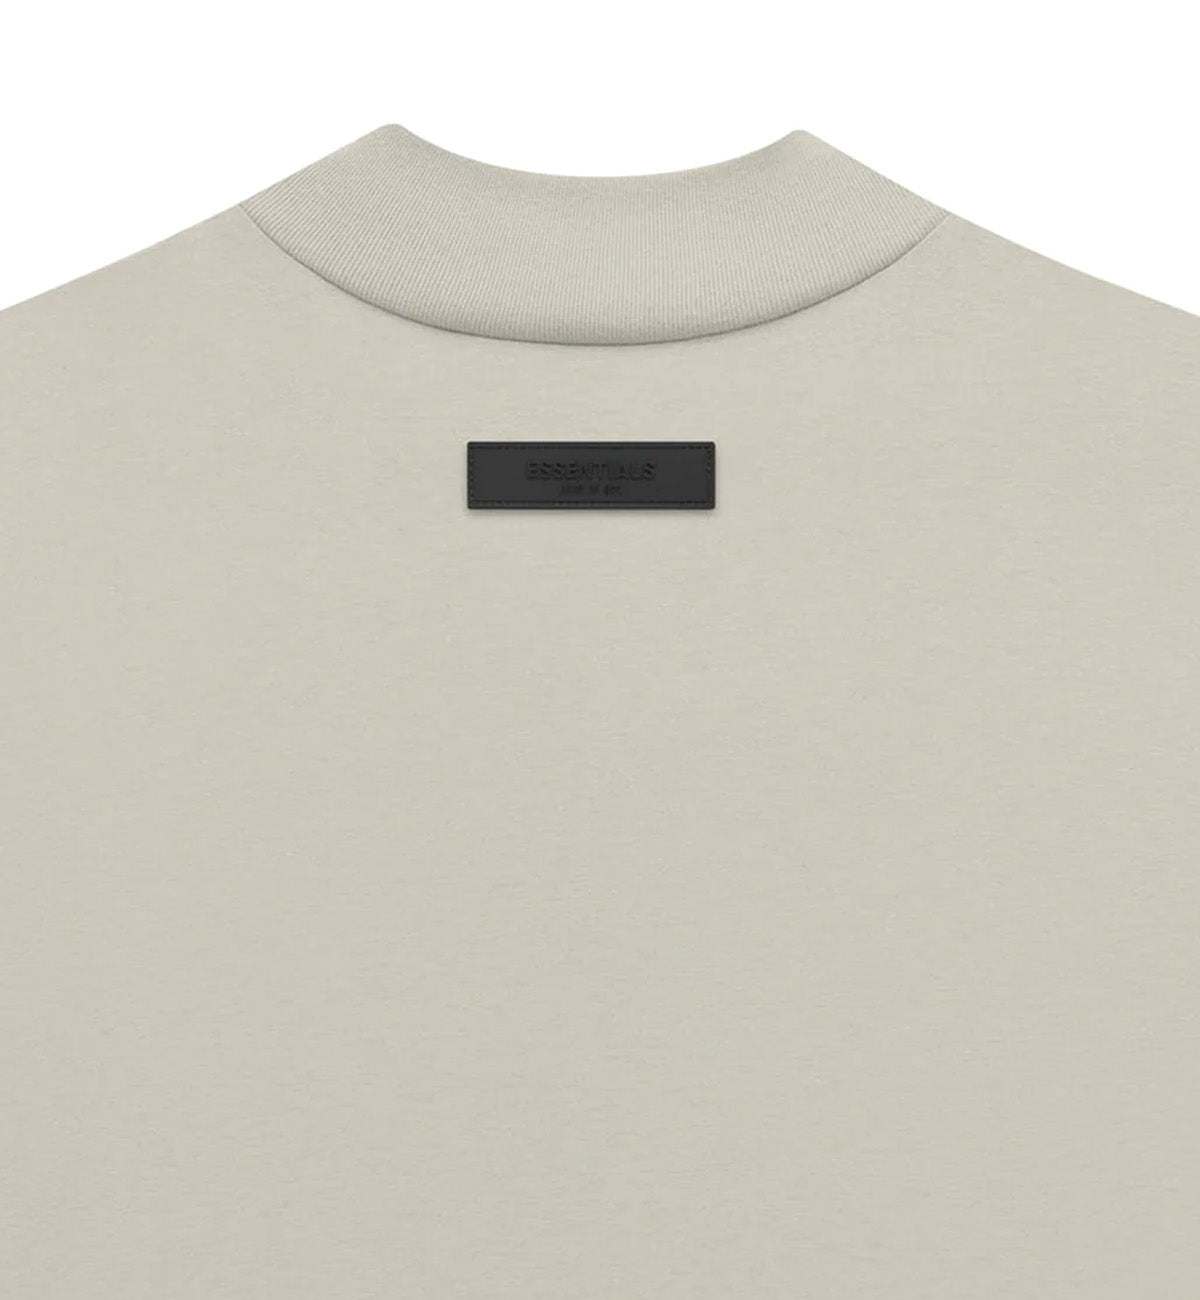 Fear of God Essential SS23 Long Sleeve T-Shirt (Seal)